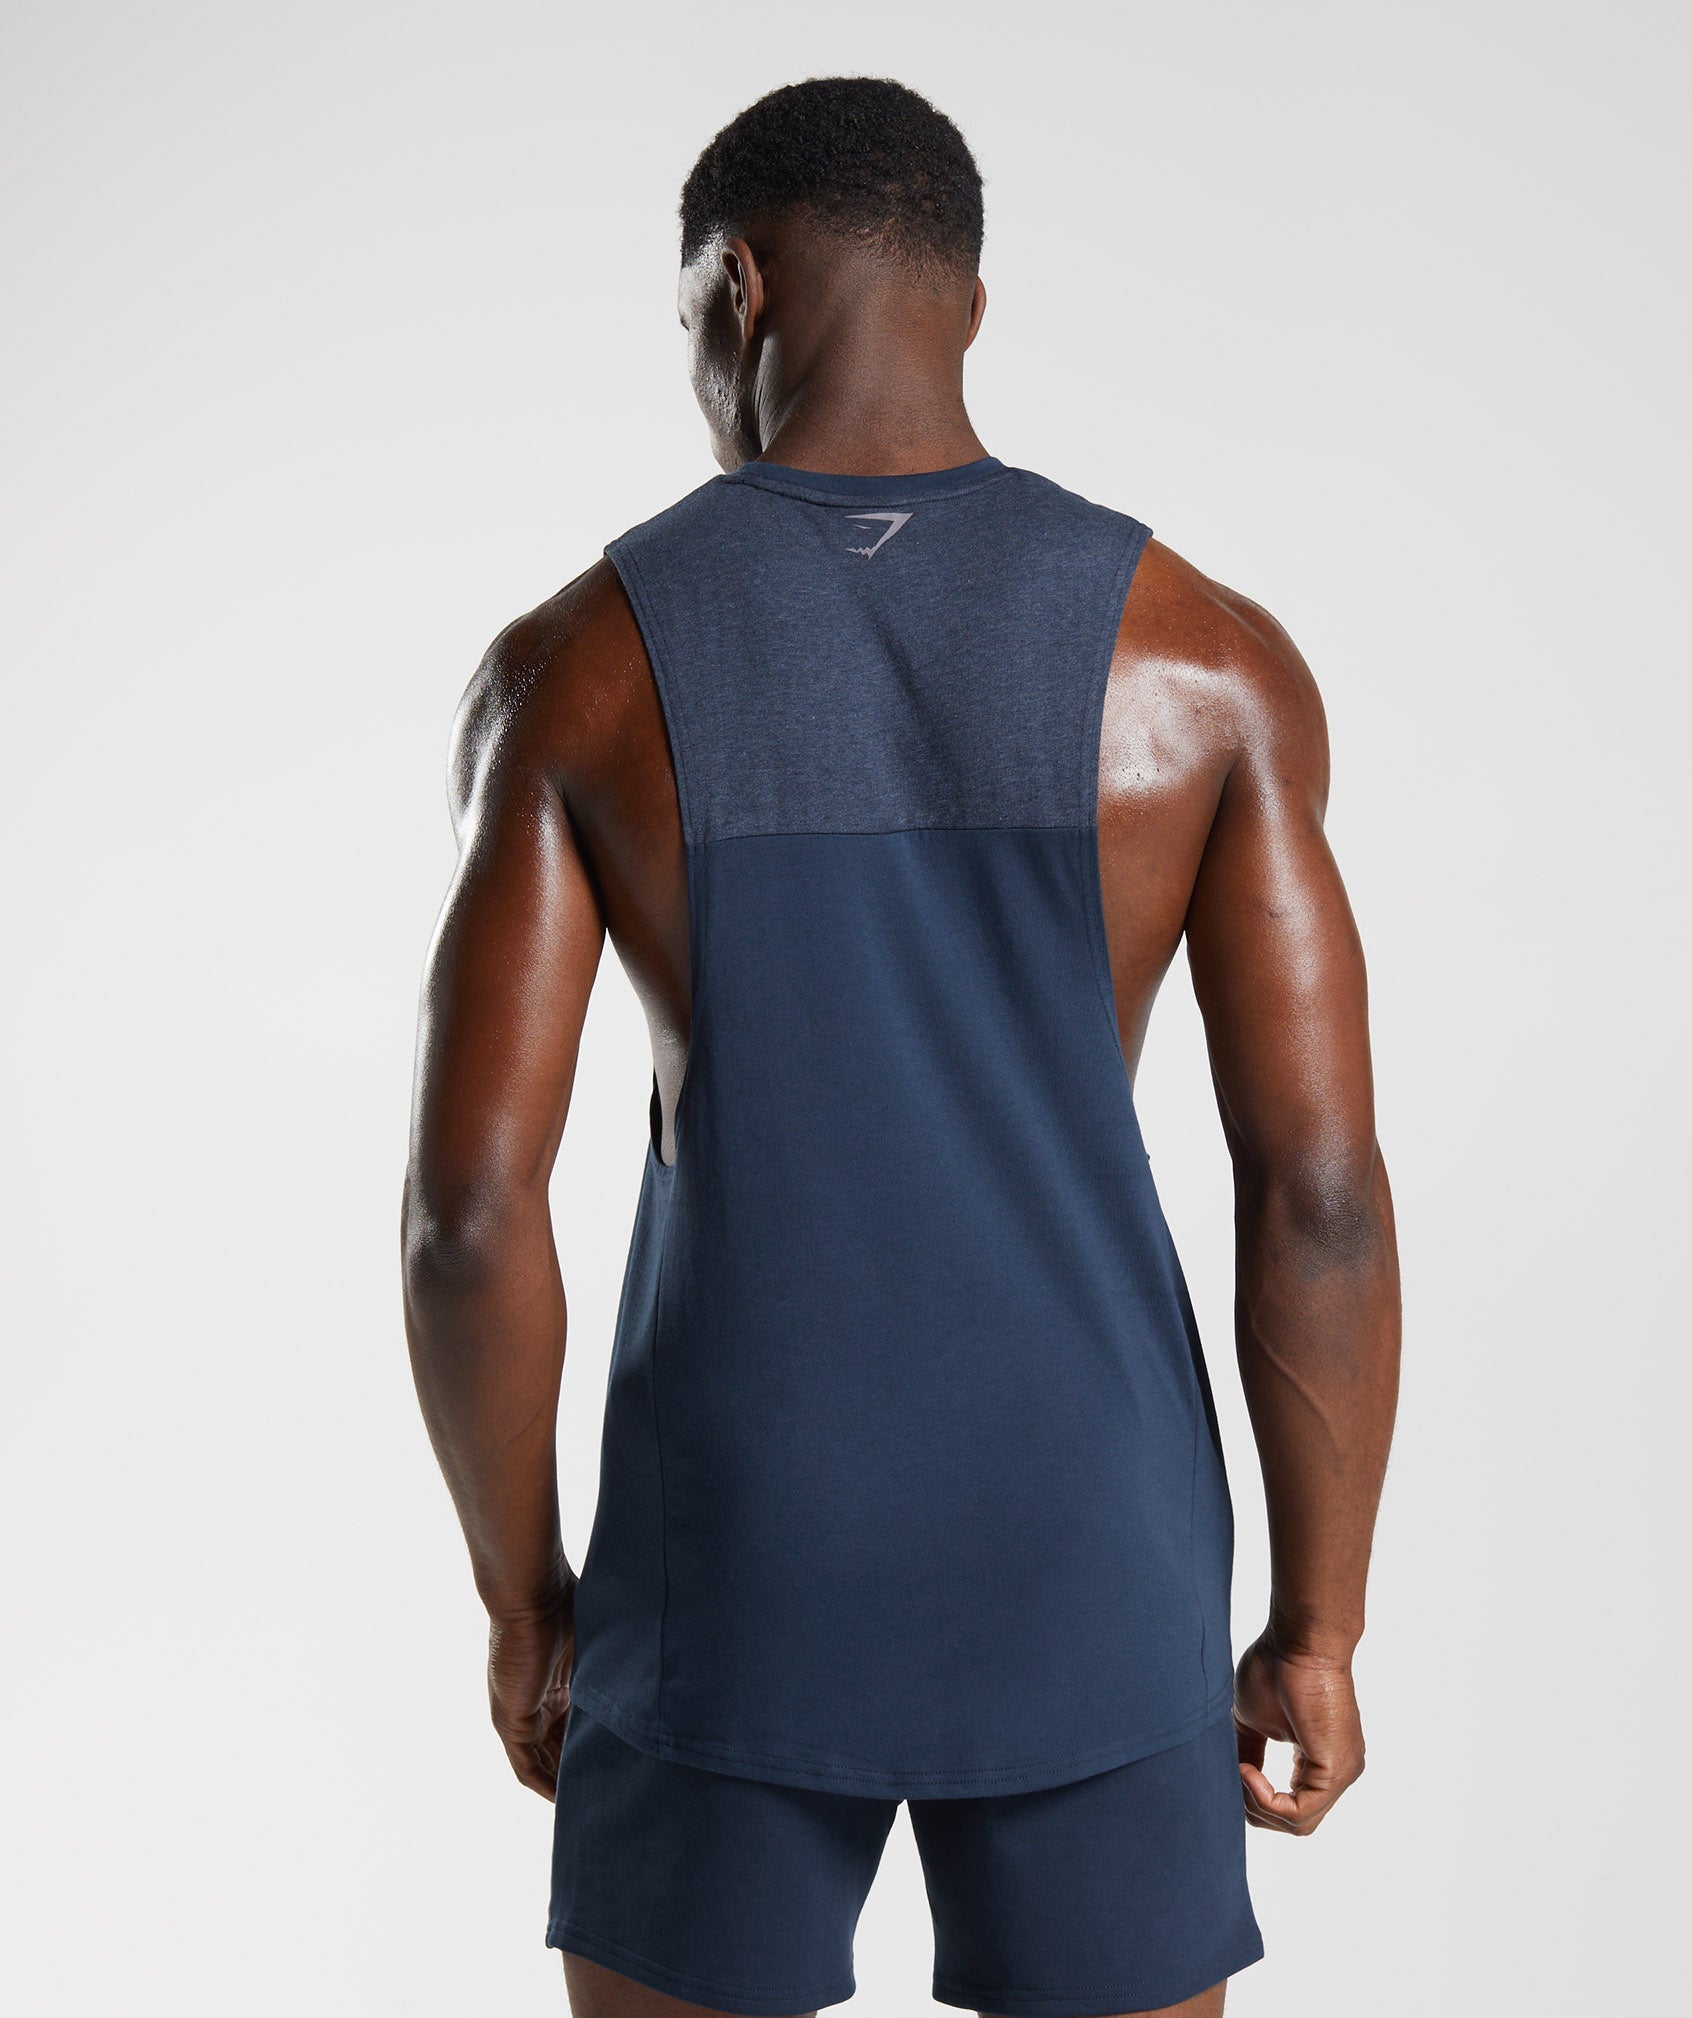 Bold React Drop Arm Tank in Navy - view 2